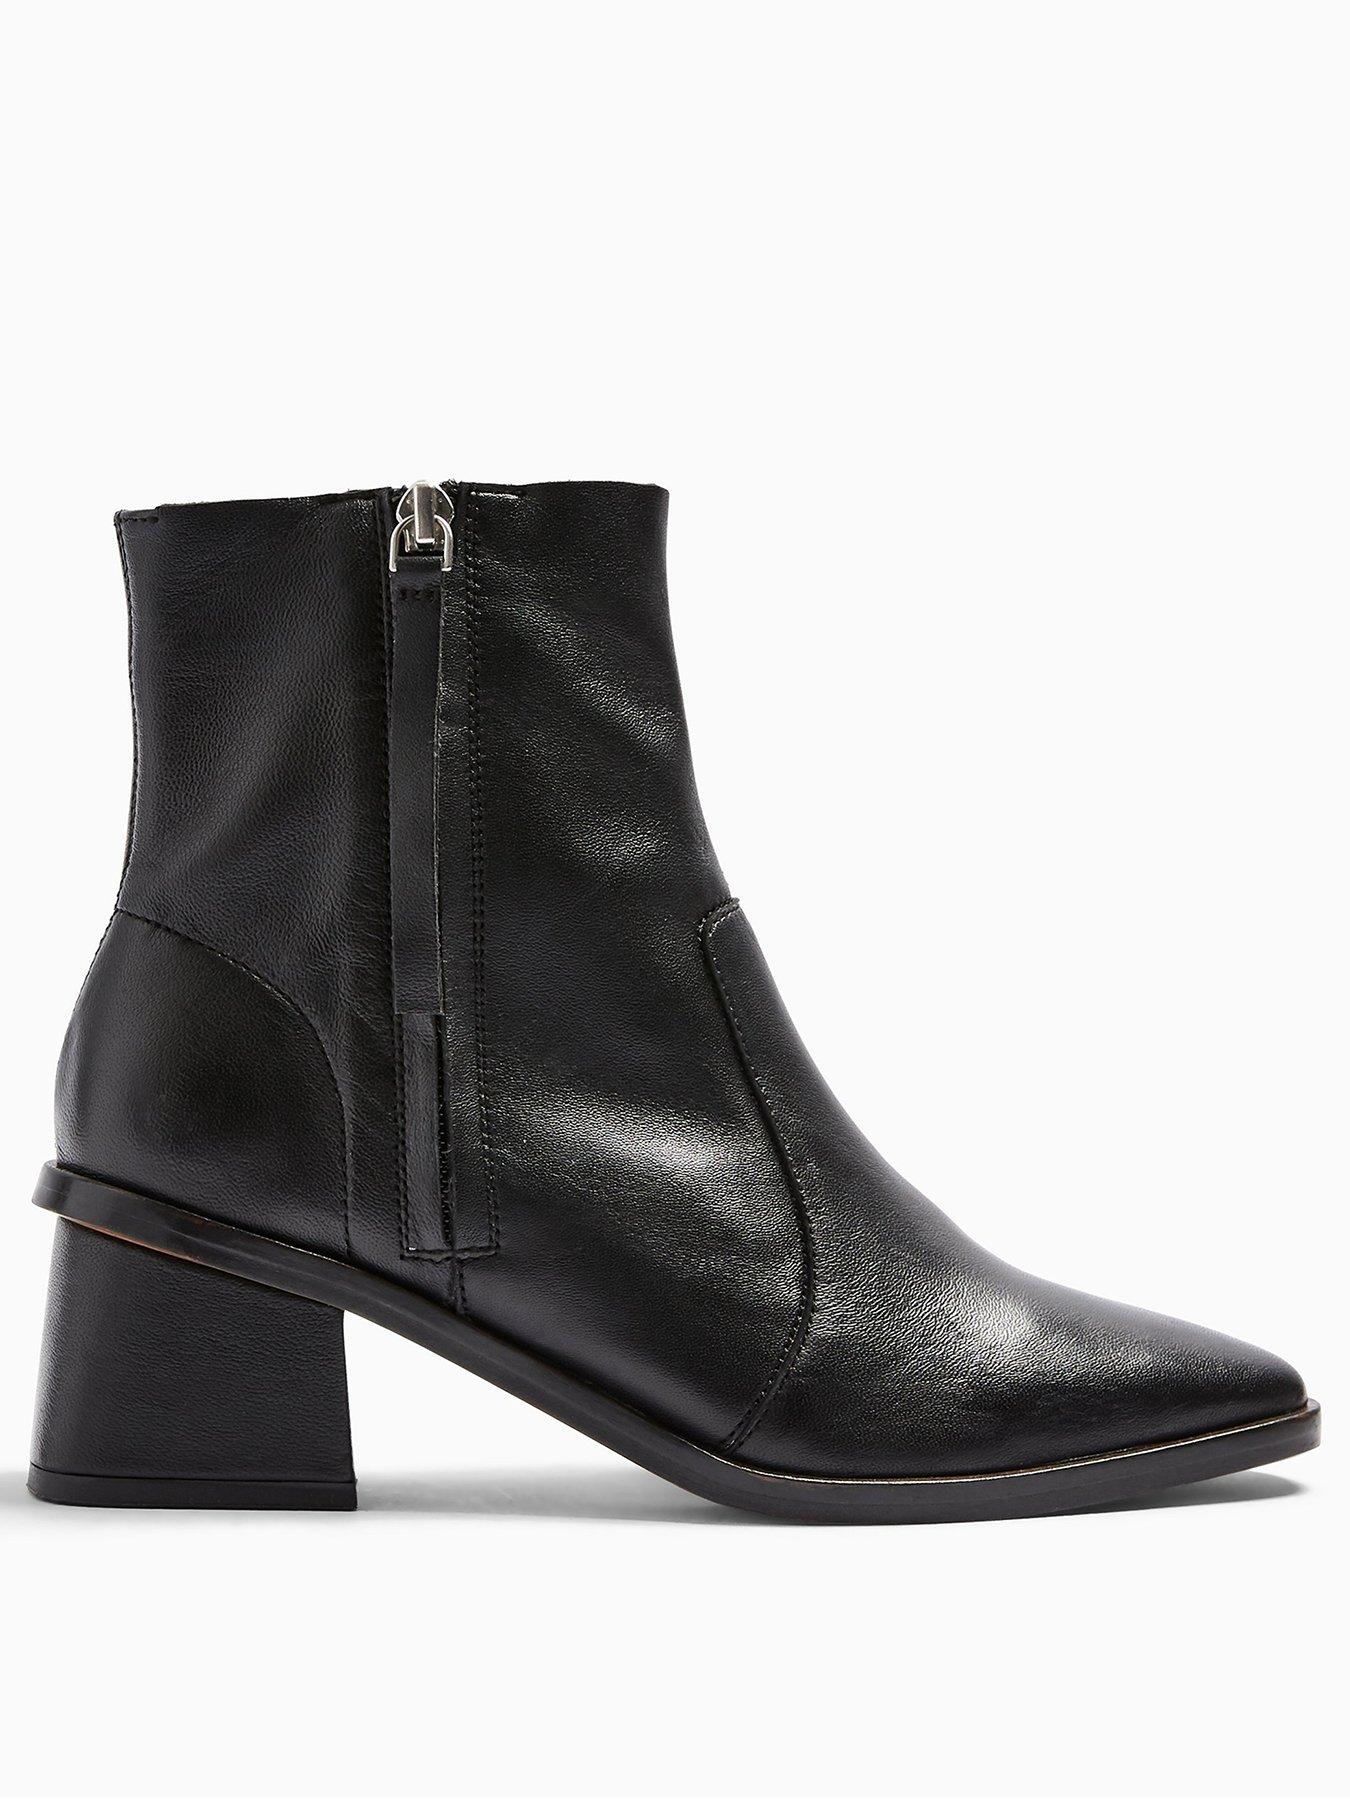 Topshop Margot Side Zip Leather Ankle 